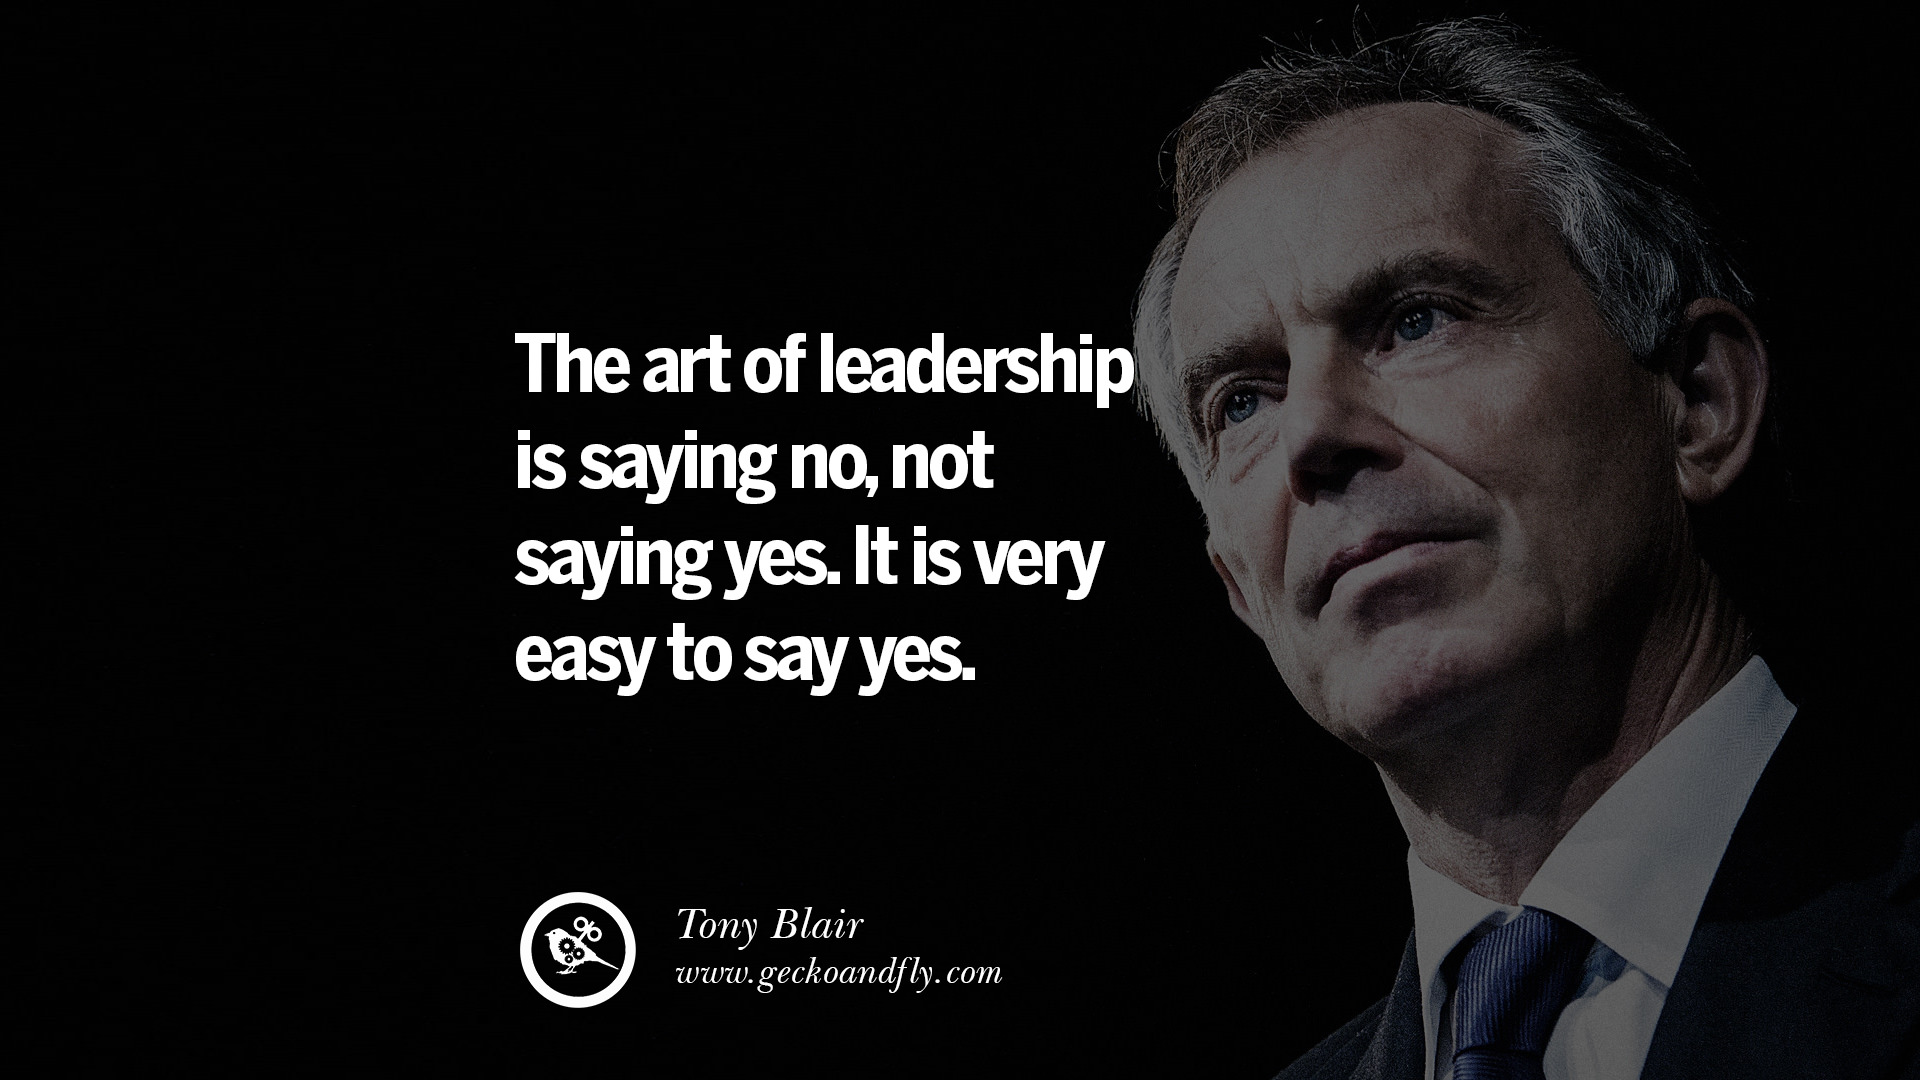 Inspirational and Motivational Quotes on Management Leadership style skills The art of leadership is saying no